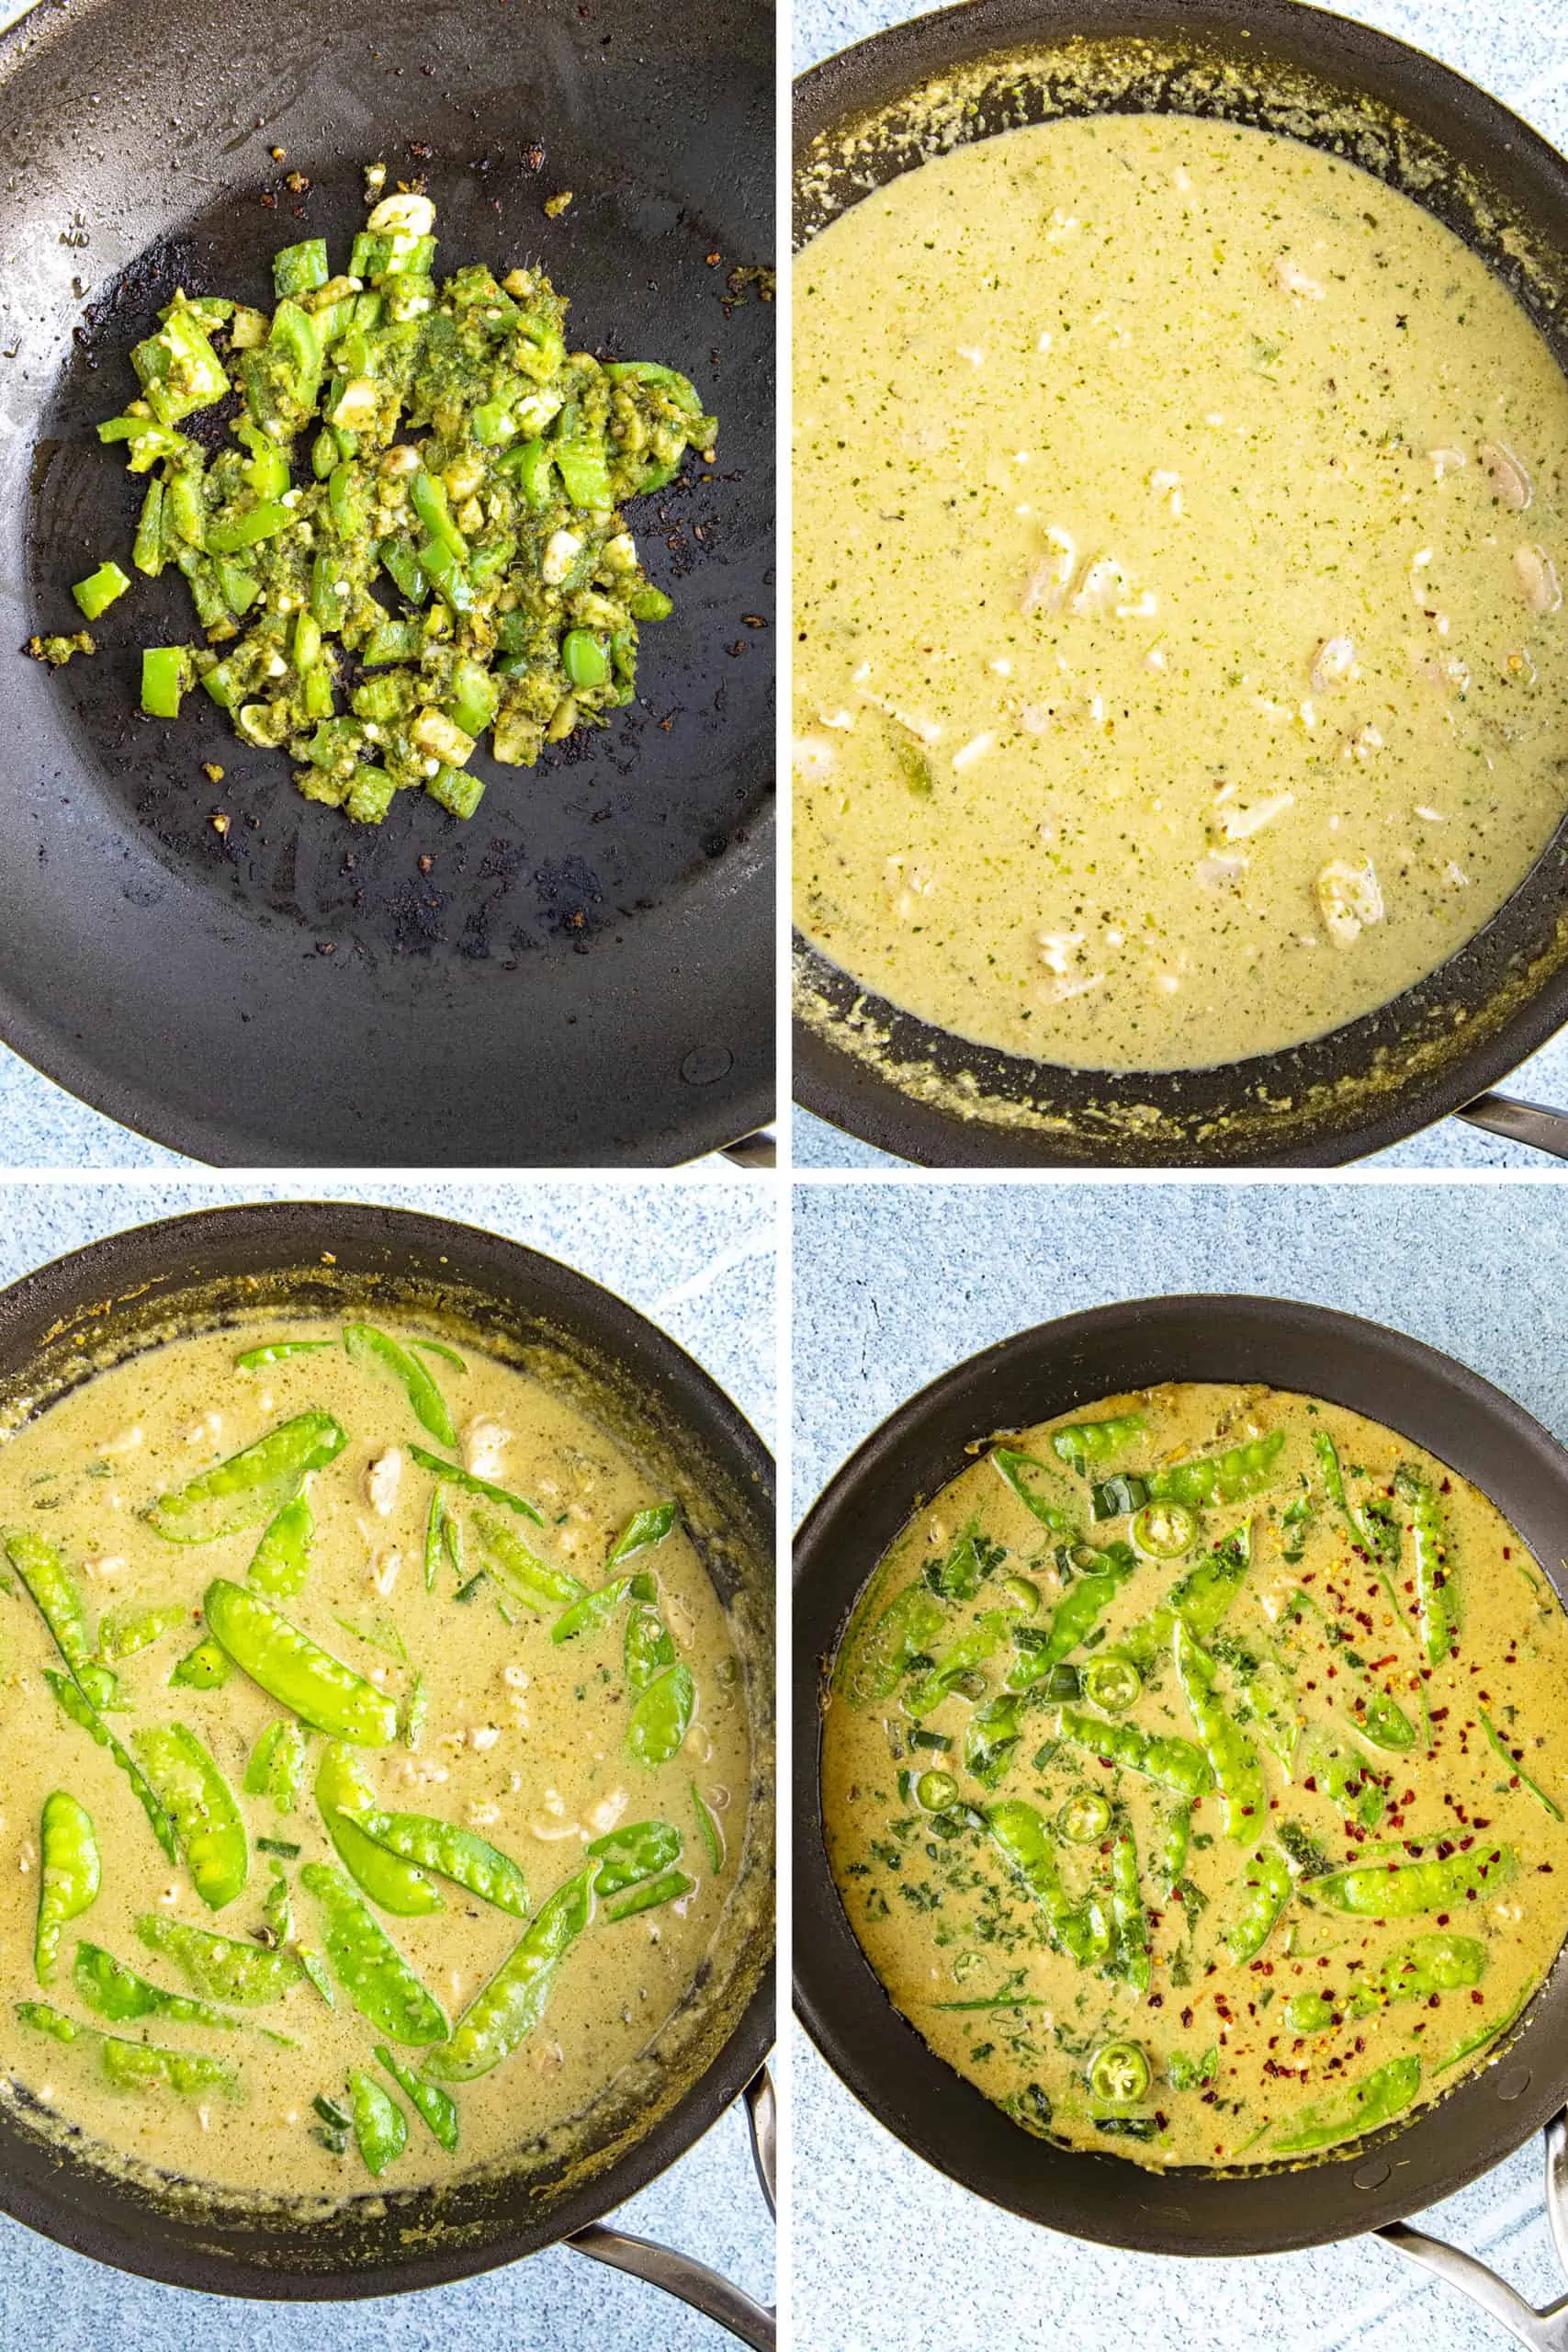 Steps to making green curry.